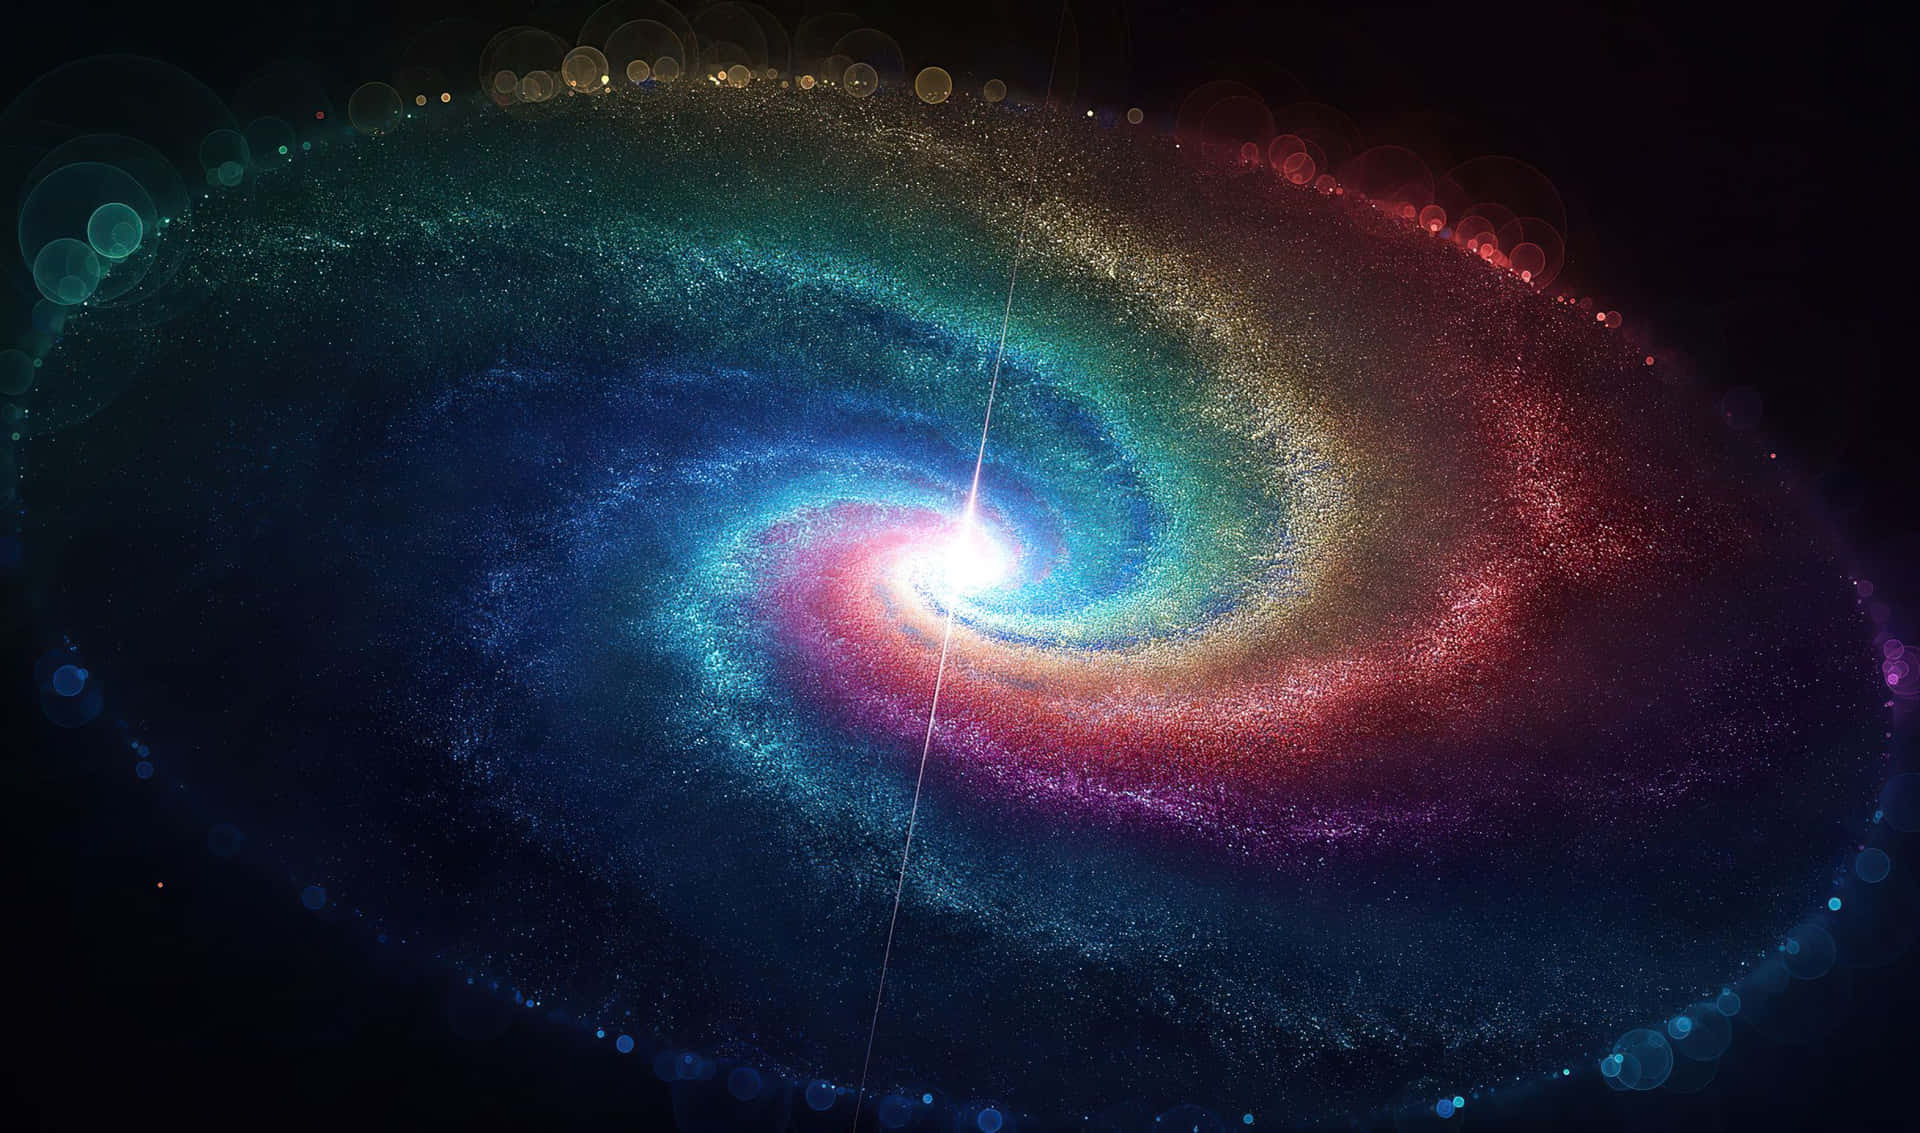 A Colorful Spiral Galaxy With A Black Background